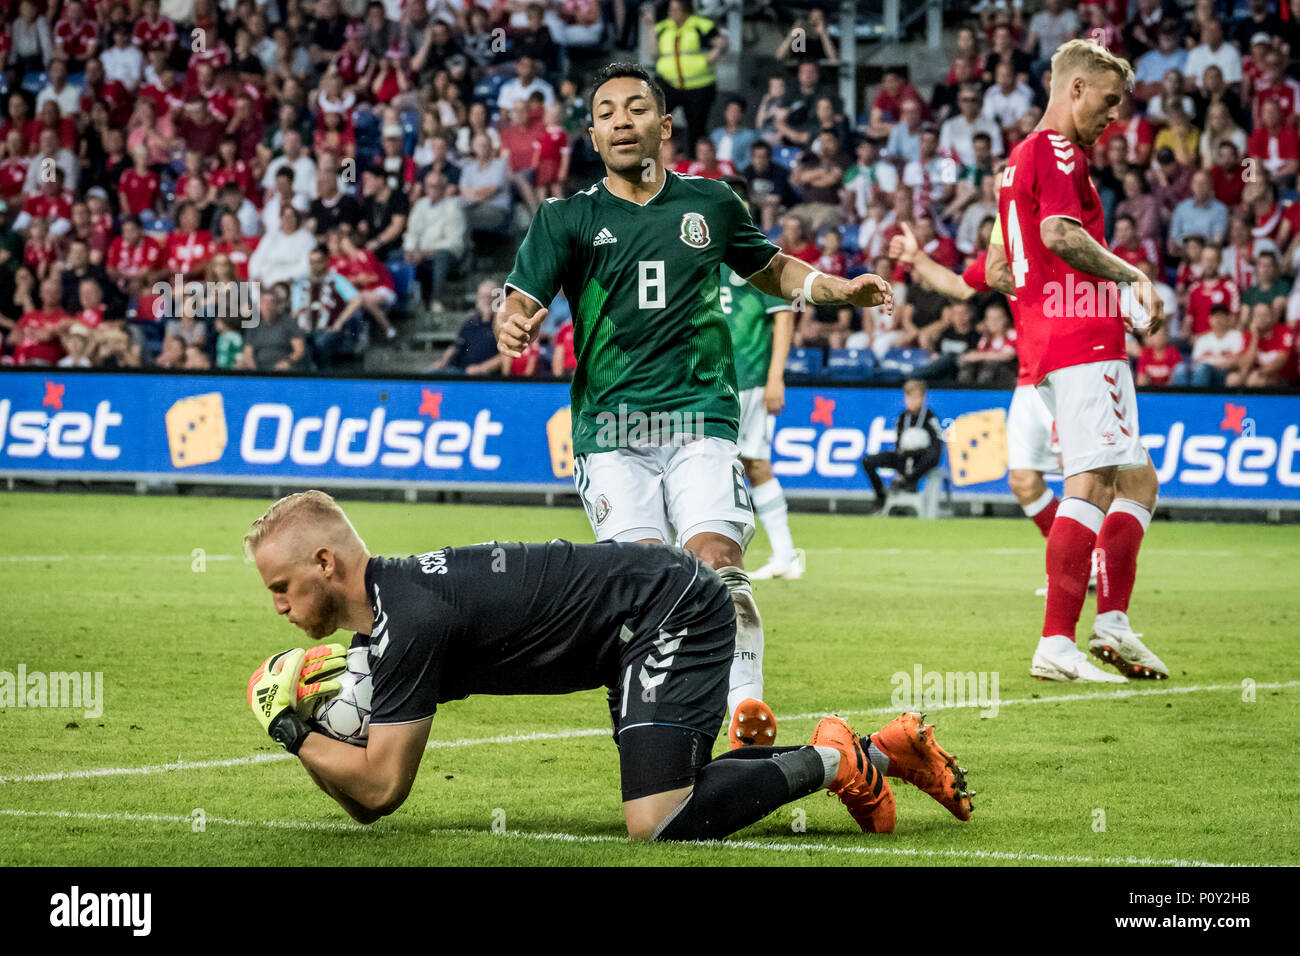 Denmark, Brøndby - June 09, 2018. Goalkeeper Kasper Schmeichel (1) of Denmark is catching the ball infront of Marco Fabian of Mexico (8) during the football friendly between Denmark and Mexico at Brøndby Stadion. (Photo credit: Gonzales Photo - Kim M. Leland). Credit: Gonzales Photo/Alamy Live News Stock Photo